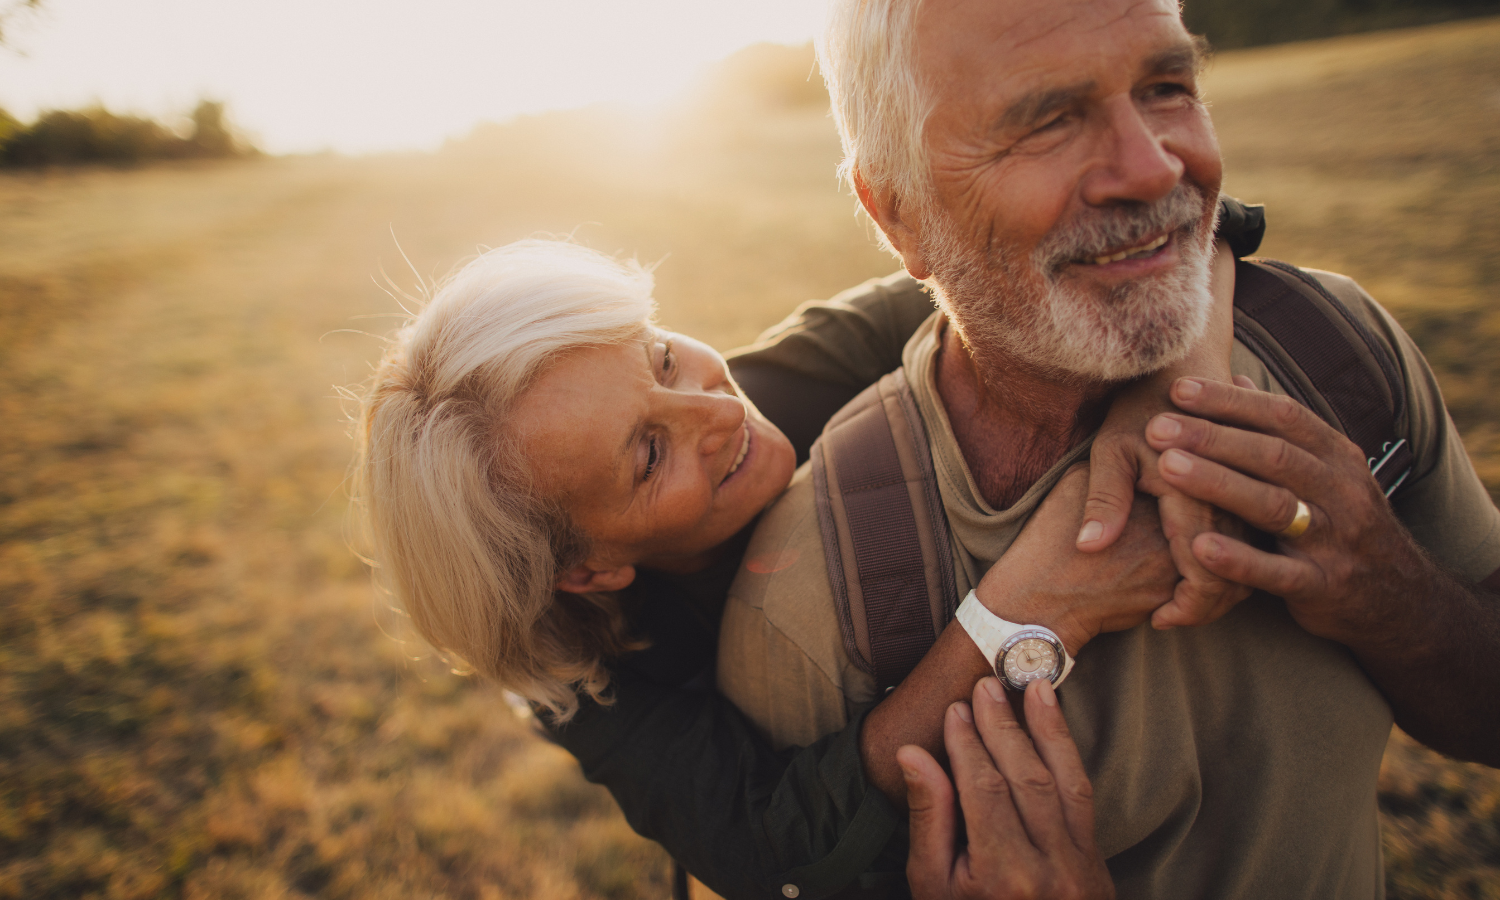 A happy retired couple embrace in a golden field